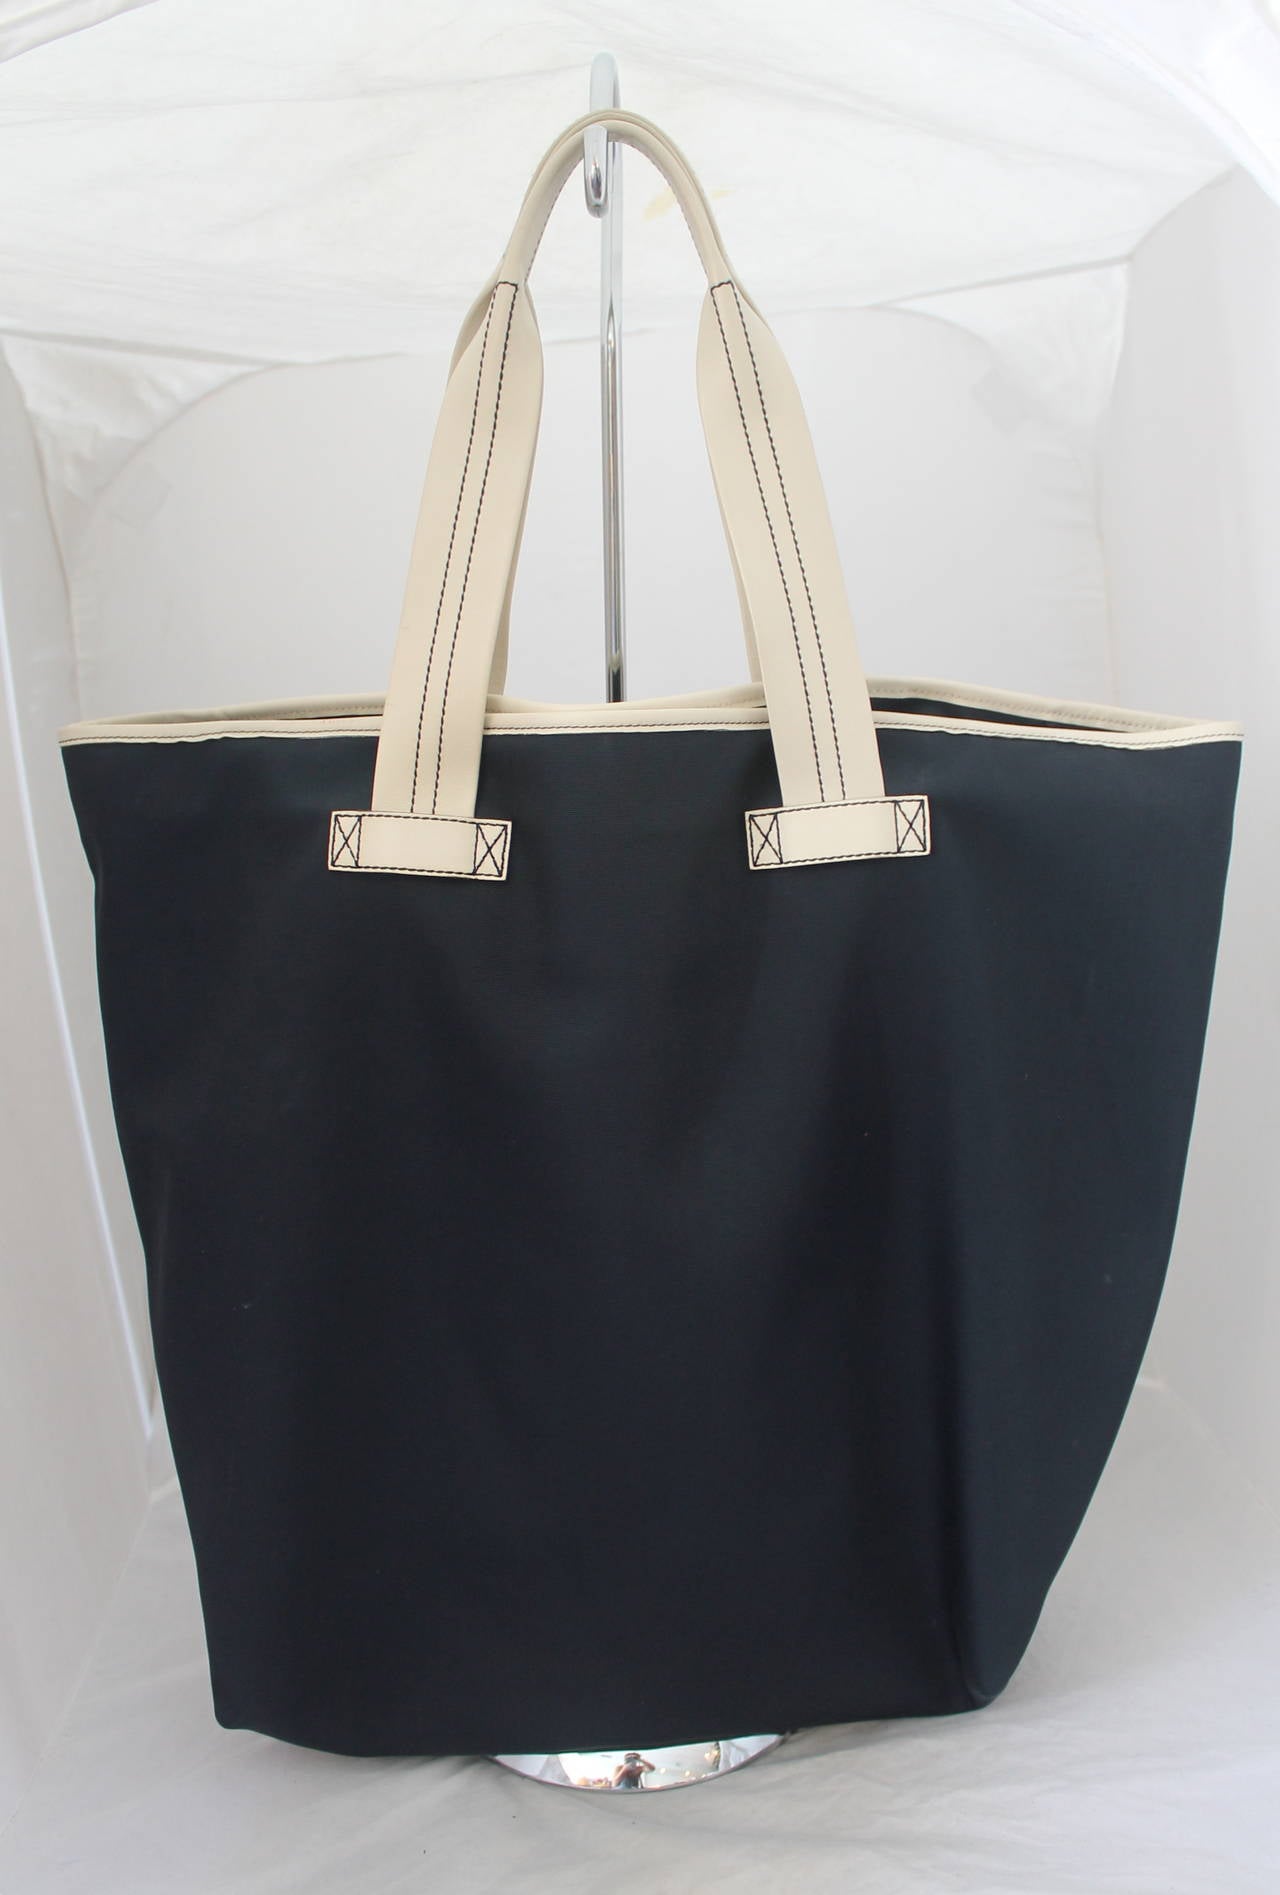 Gucci Navy Large Beach Tote with Ivory Handle, Trim, and Cursive Gucci Logo. This bag is in Very Good Condition.

Measurements:
Height: 20 